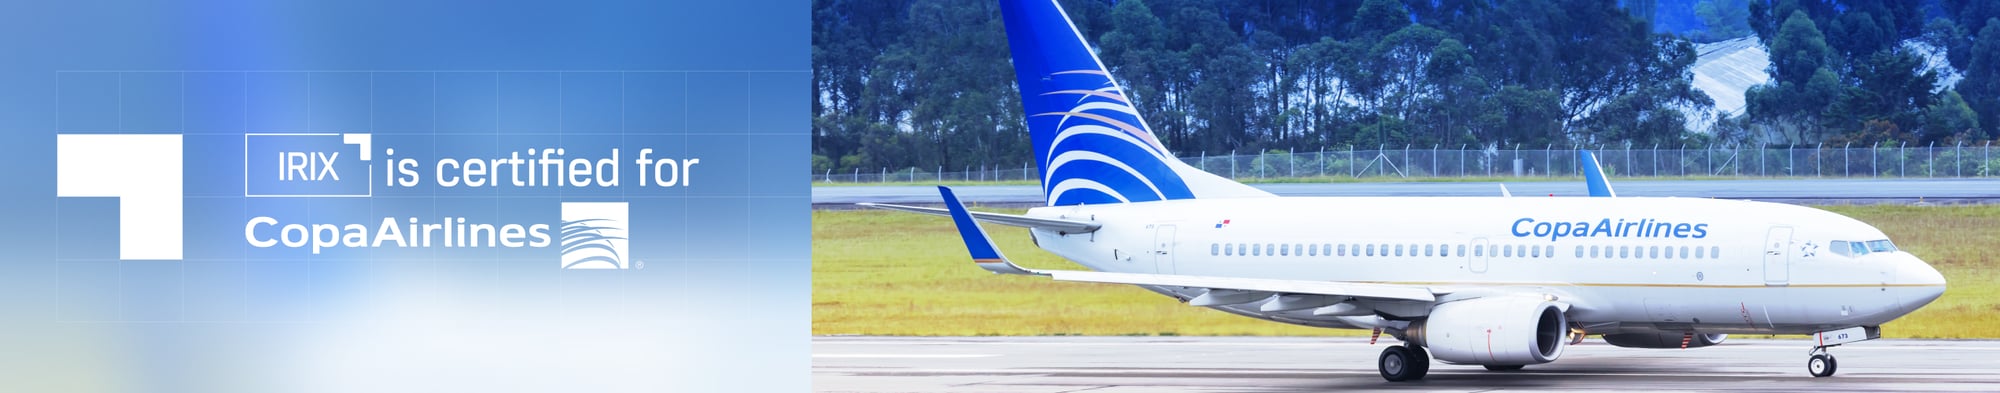 IRIX is certified for Copa Airlines